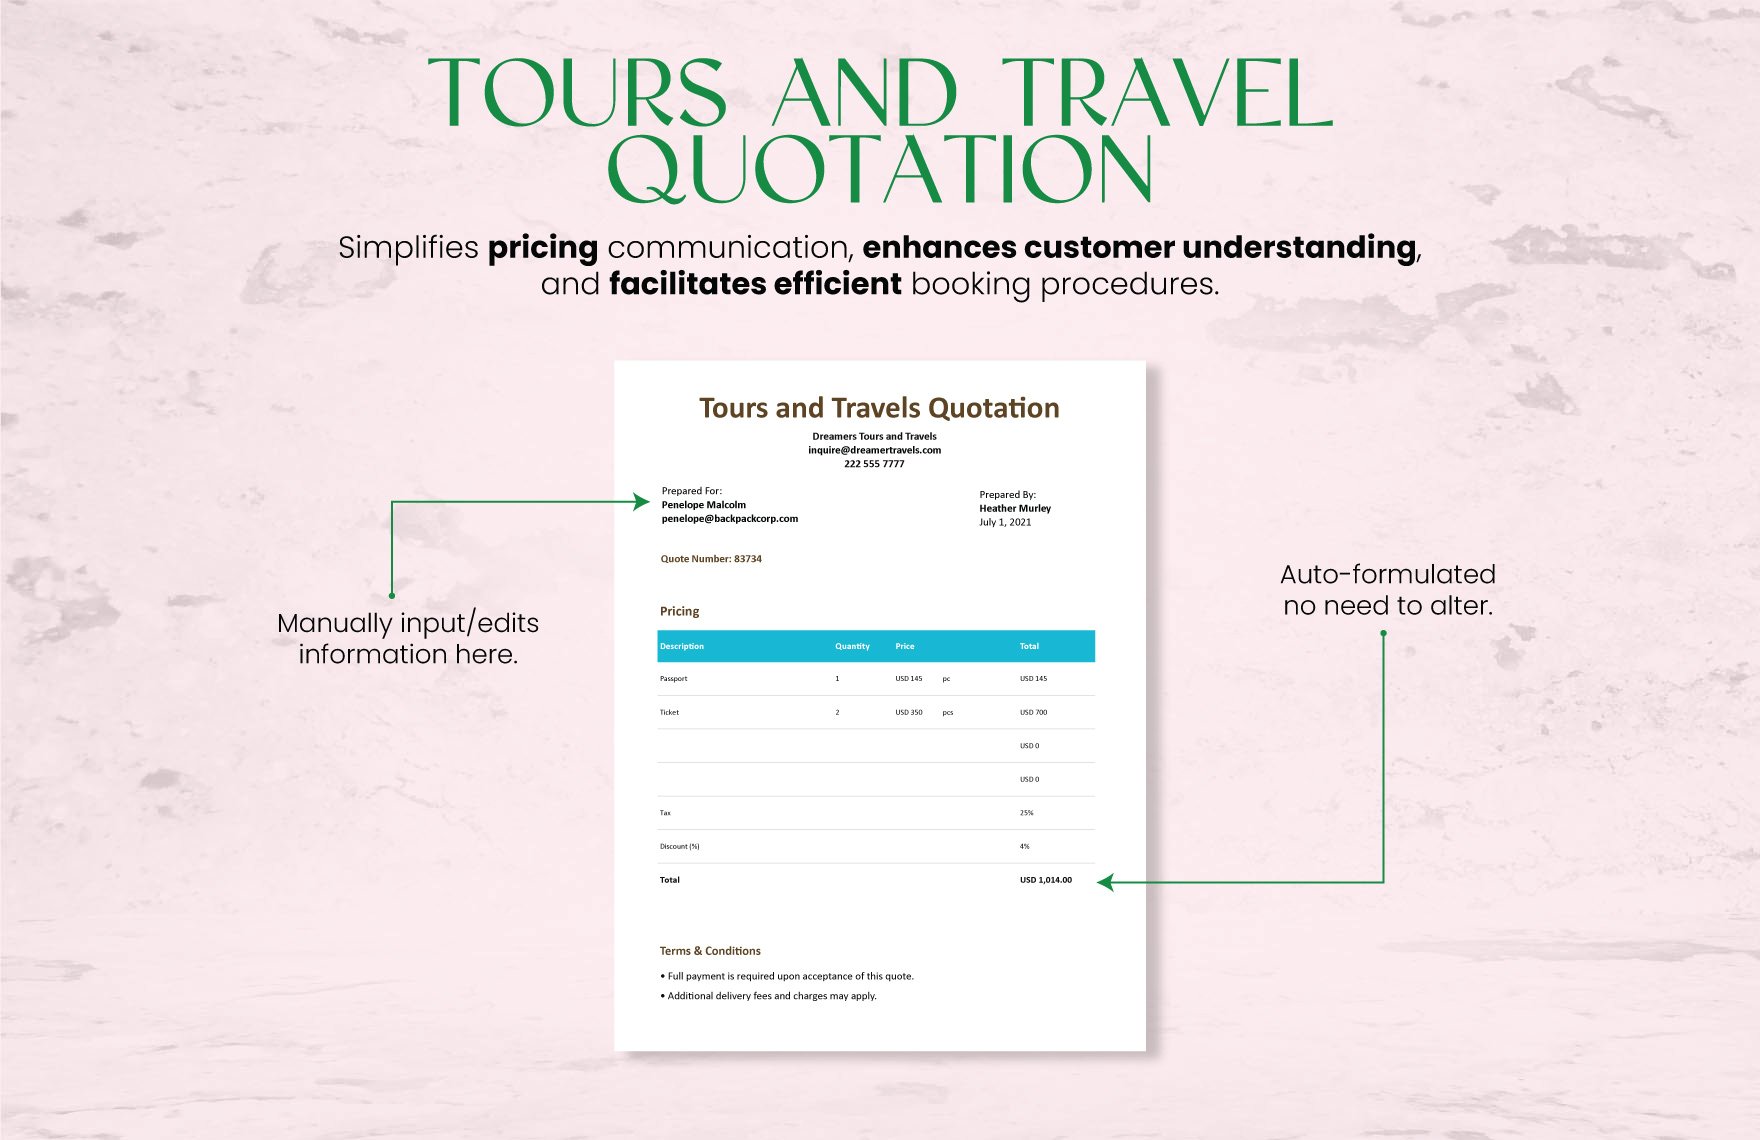 Tours and Travel Quotation Template